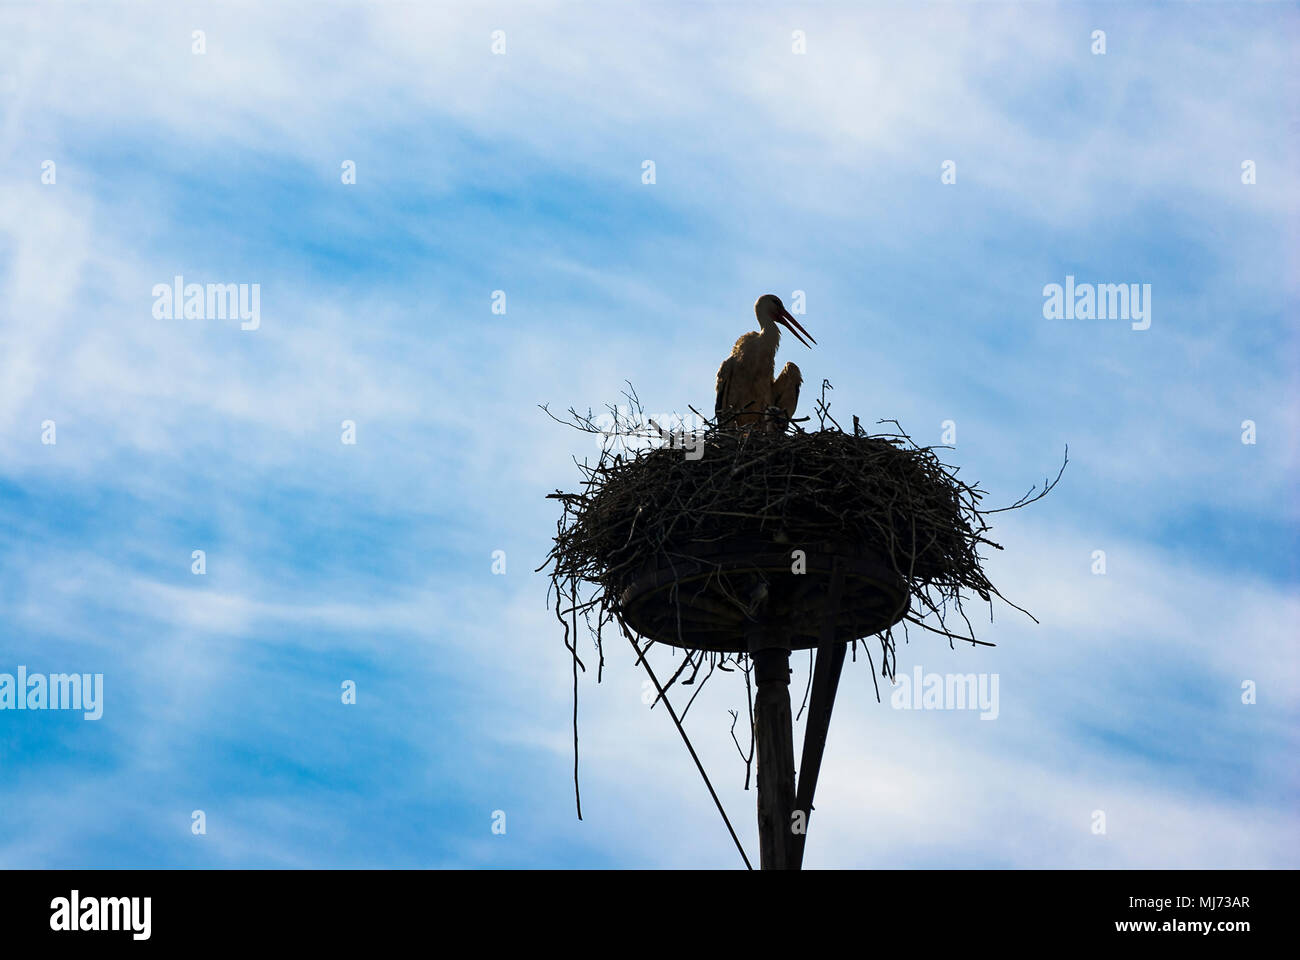 Silhouette of a stork in the nest in front of cloudy blue sky. Stock Photo